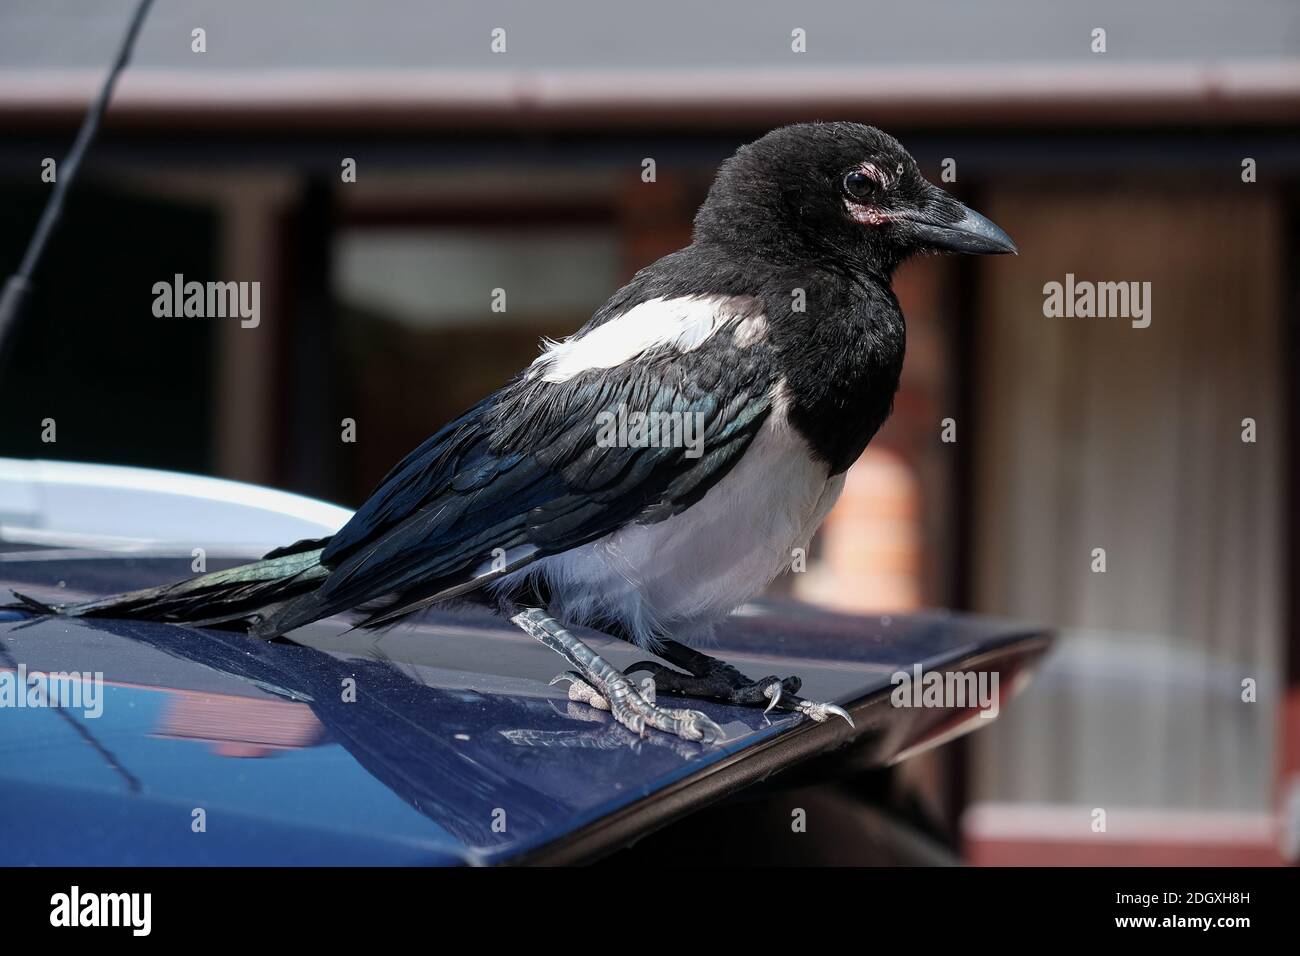 Wide angle Close-up of a young Magpie bird sat on the rear of a car spoiler. Stock Photo